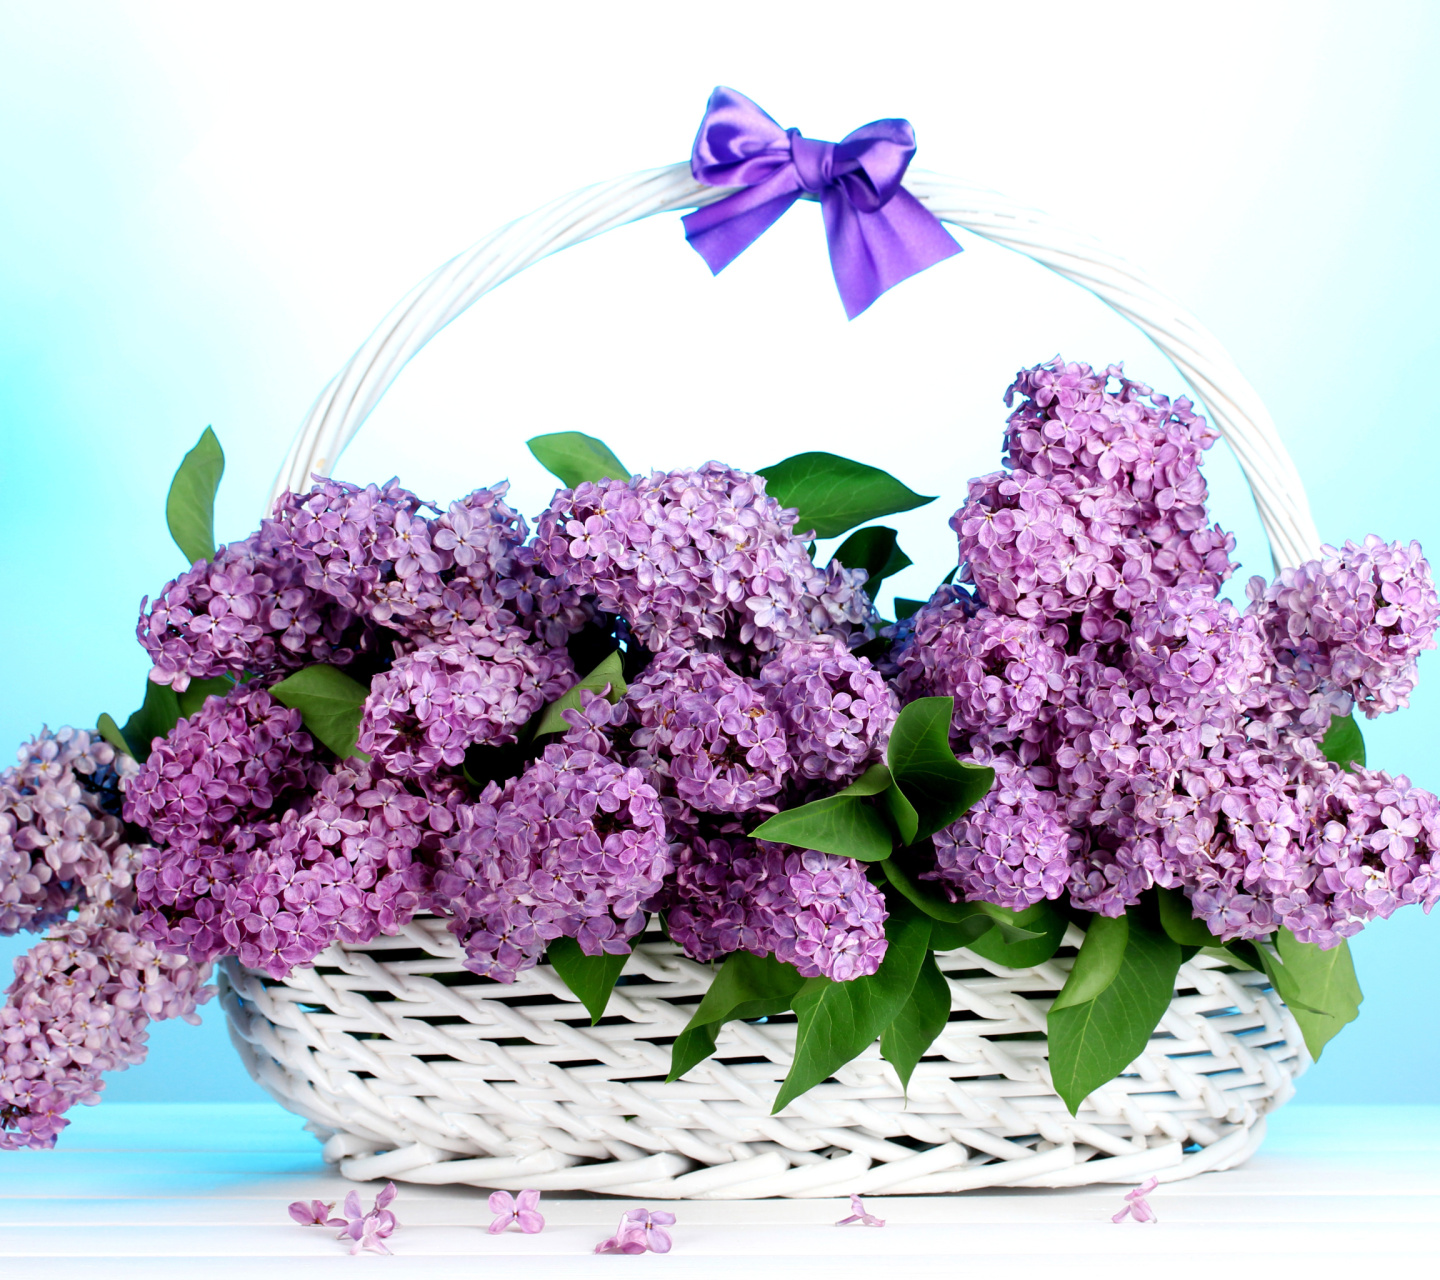 Baskets with lilac flowers screenshot #1 1440x1280